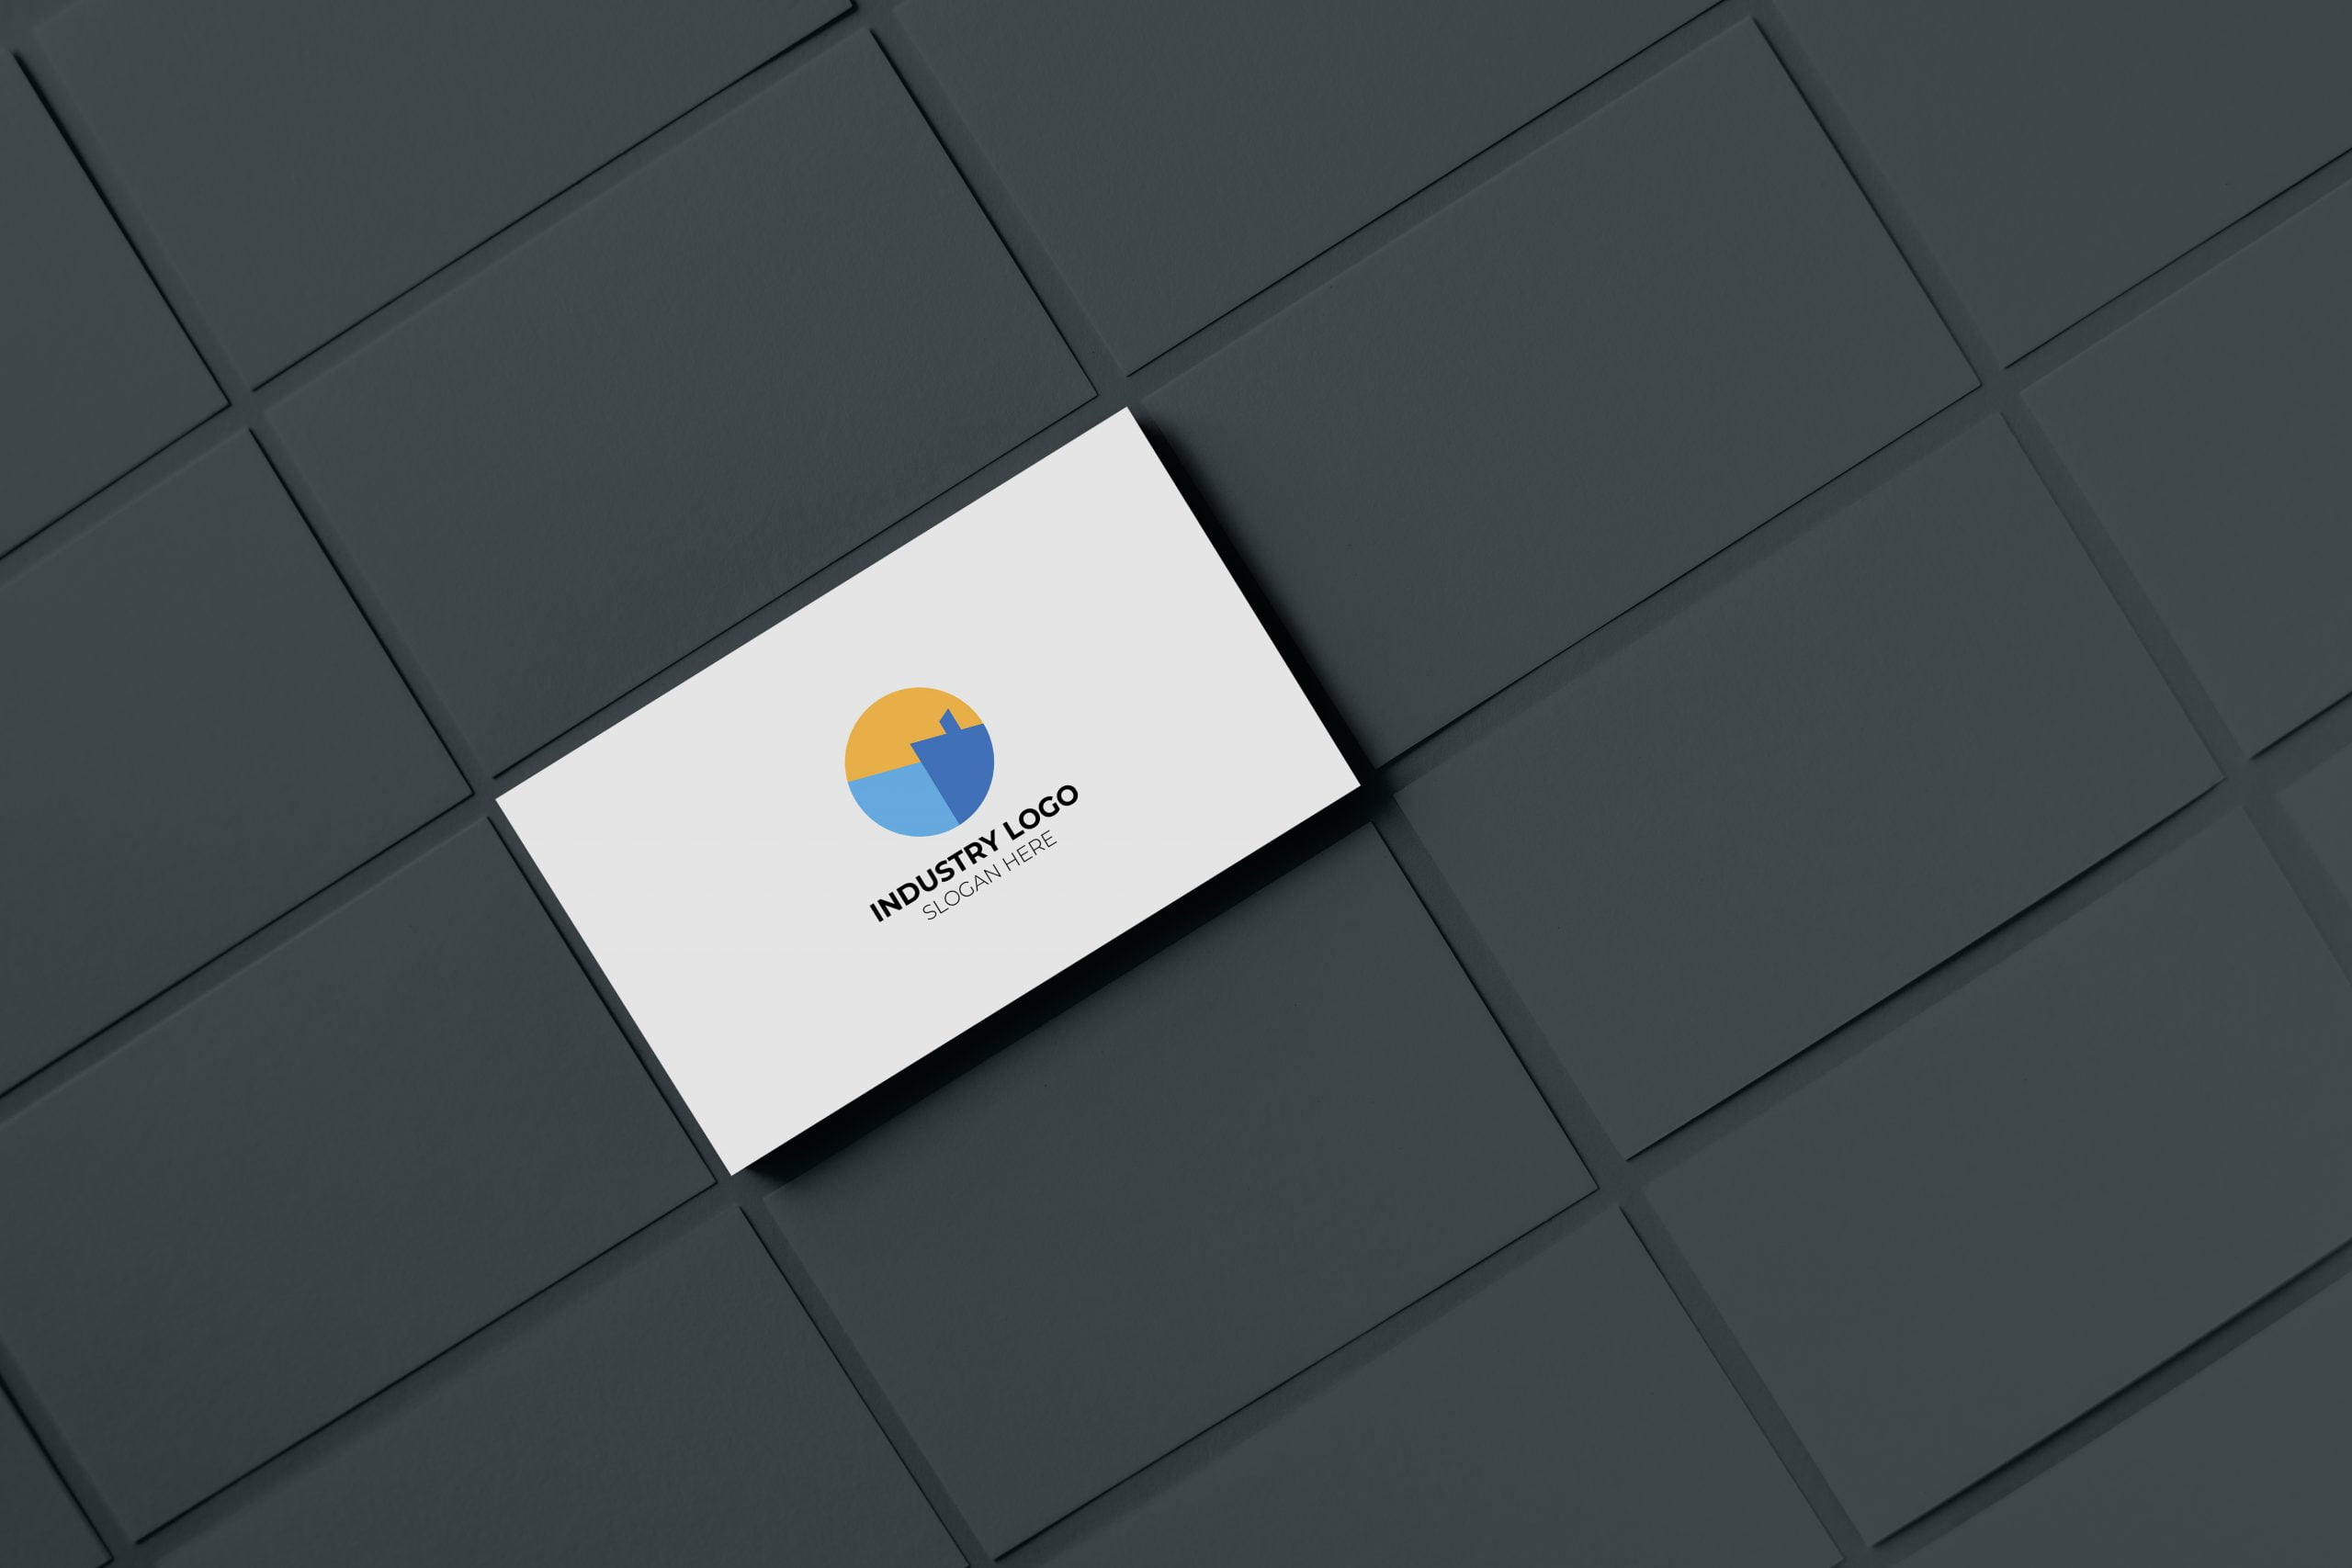 INDUSTRY LOGO WITH BUSINESS CARD PRESENTATION